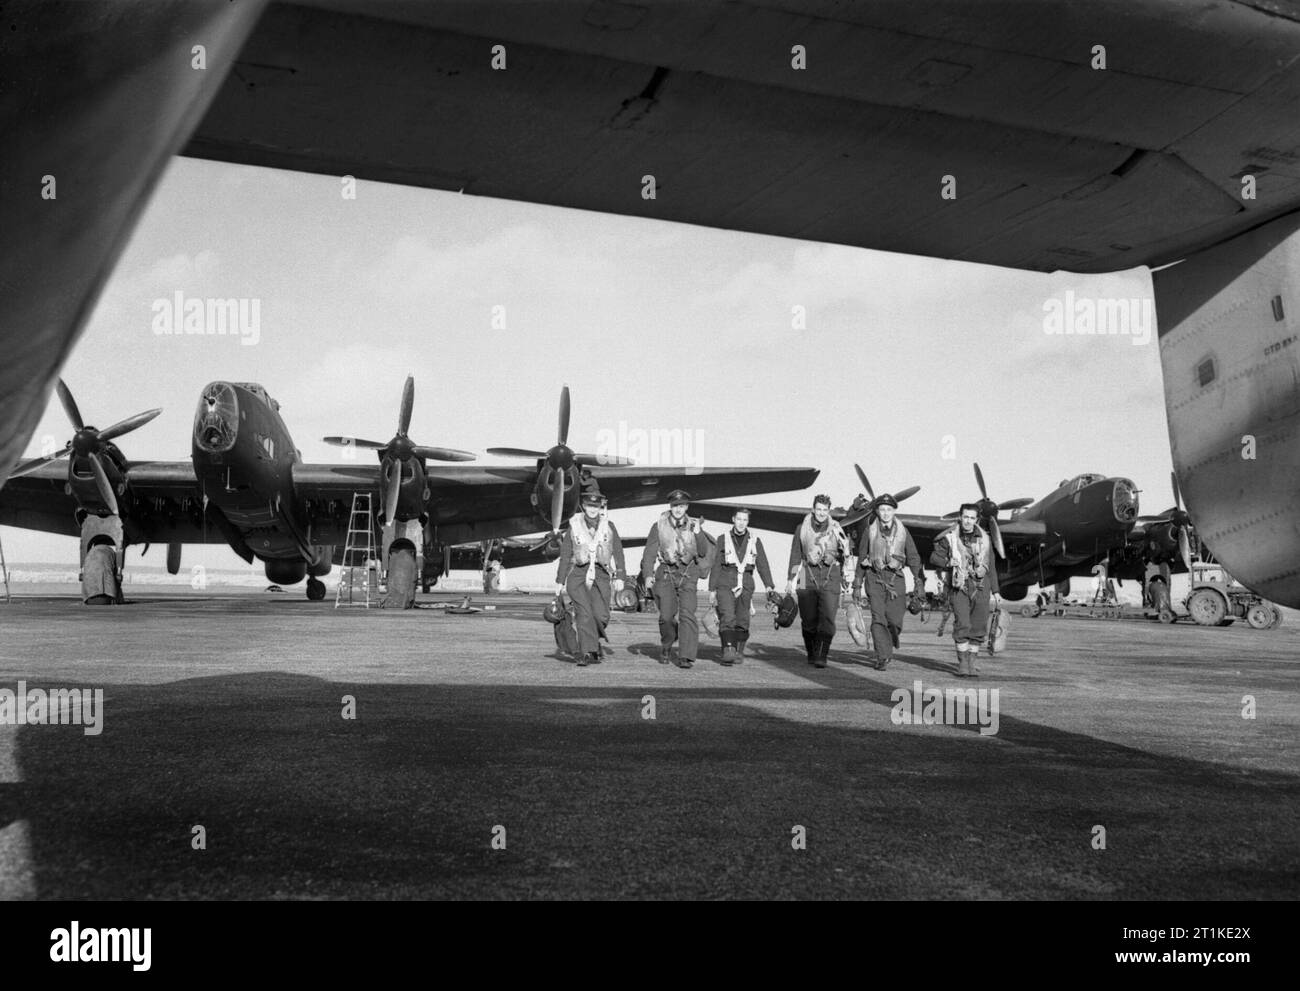 Aircrew and Handley Page Halifax Mk III bombers of No. 502 Squadron operating with RAF Coastal Command at Stornoway, in the Outer Hebrides, February 1945. A crew of No. 502 Squadron RAF walk to their aircraft past Handley Page Halifax Mark IIIs at Stornoway, Outer Hebrides. Stock Photo